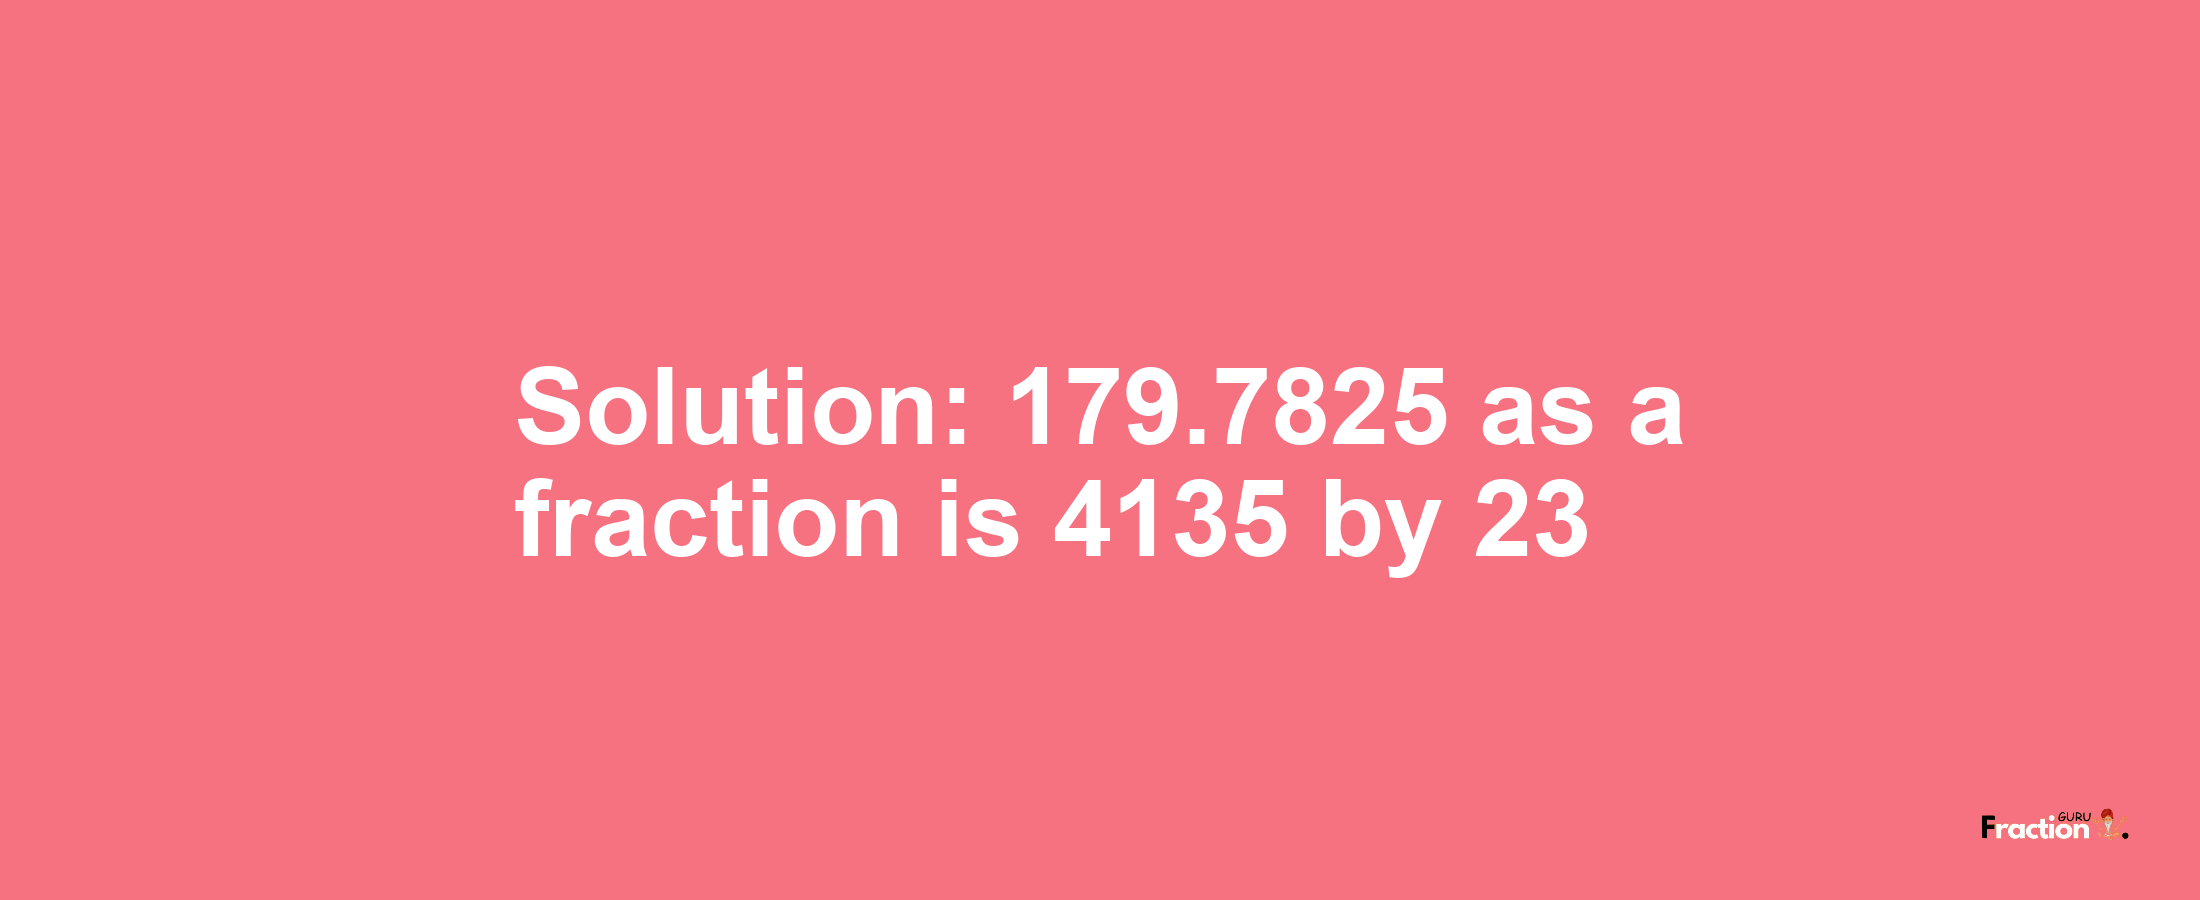 Solution:179.7825 as a fraction is 4135/23